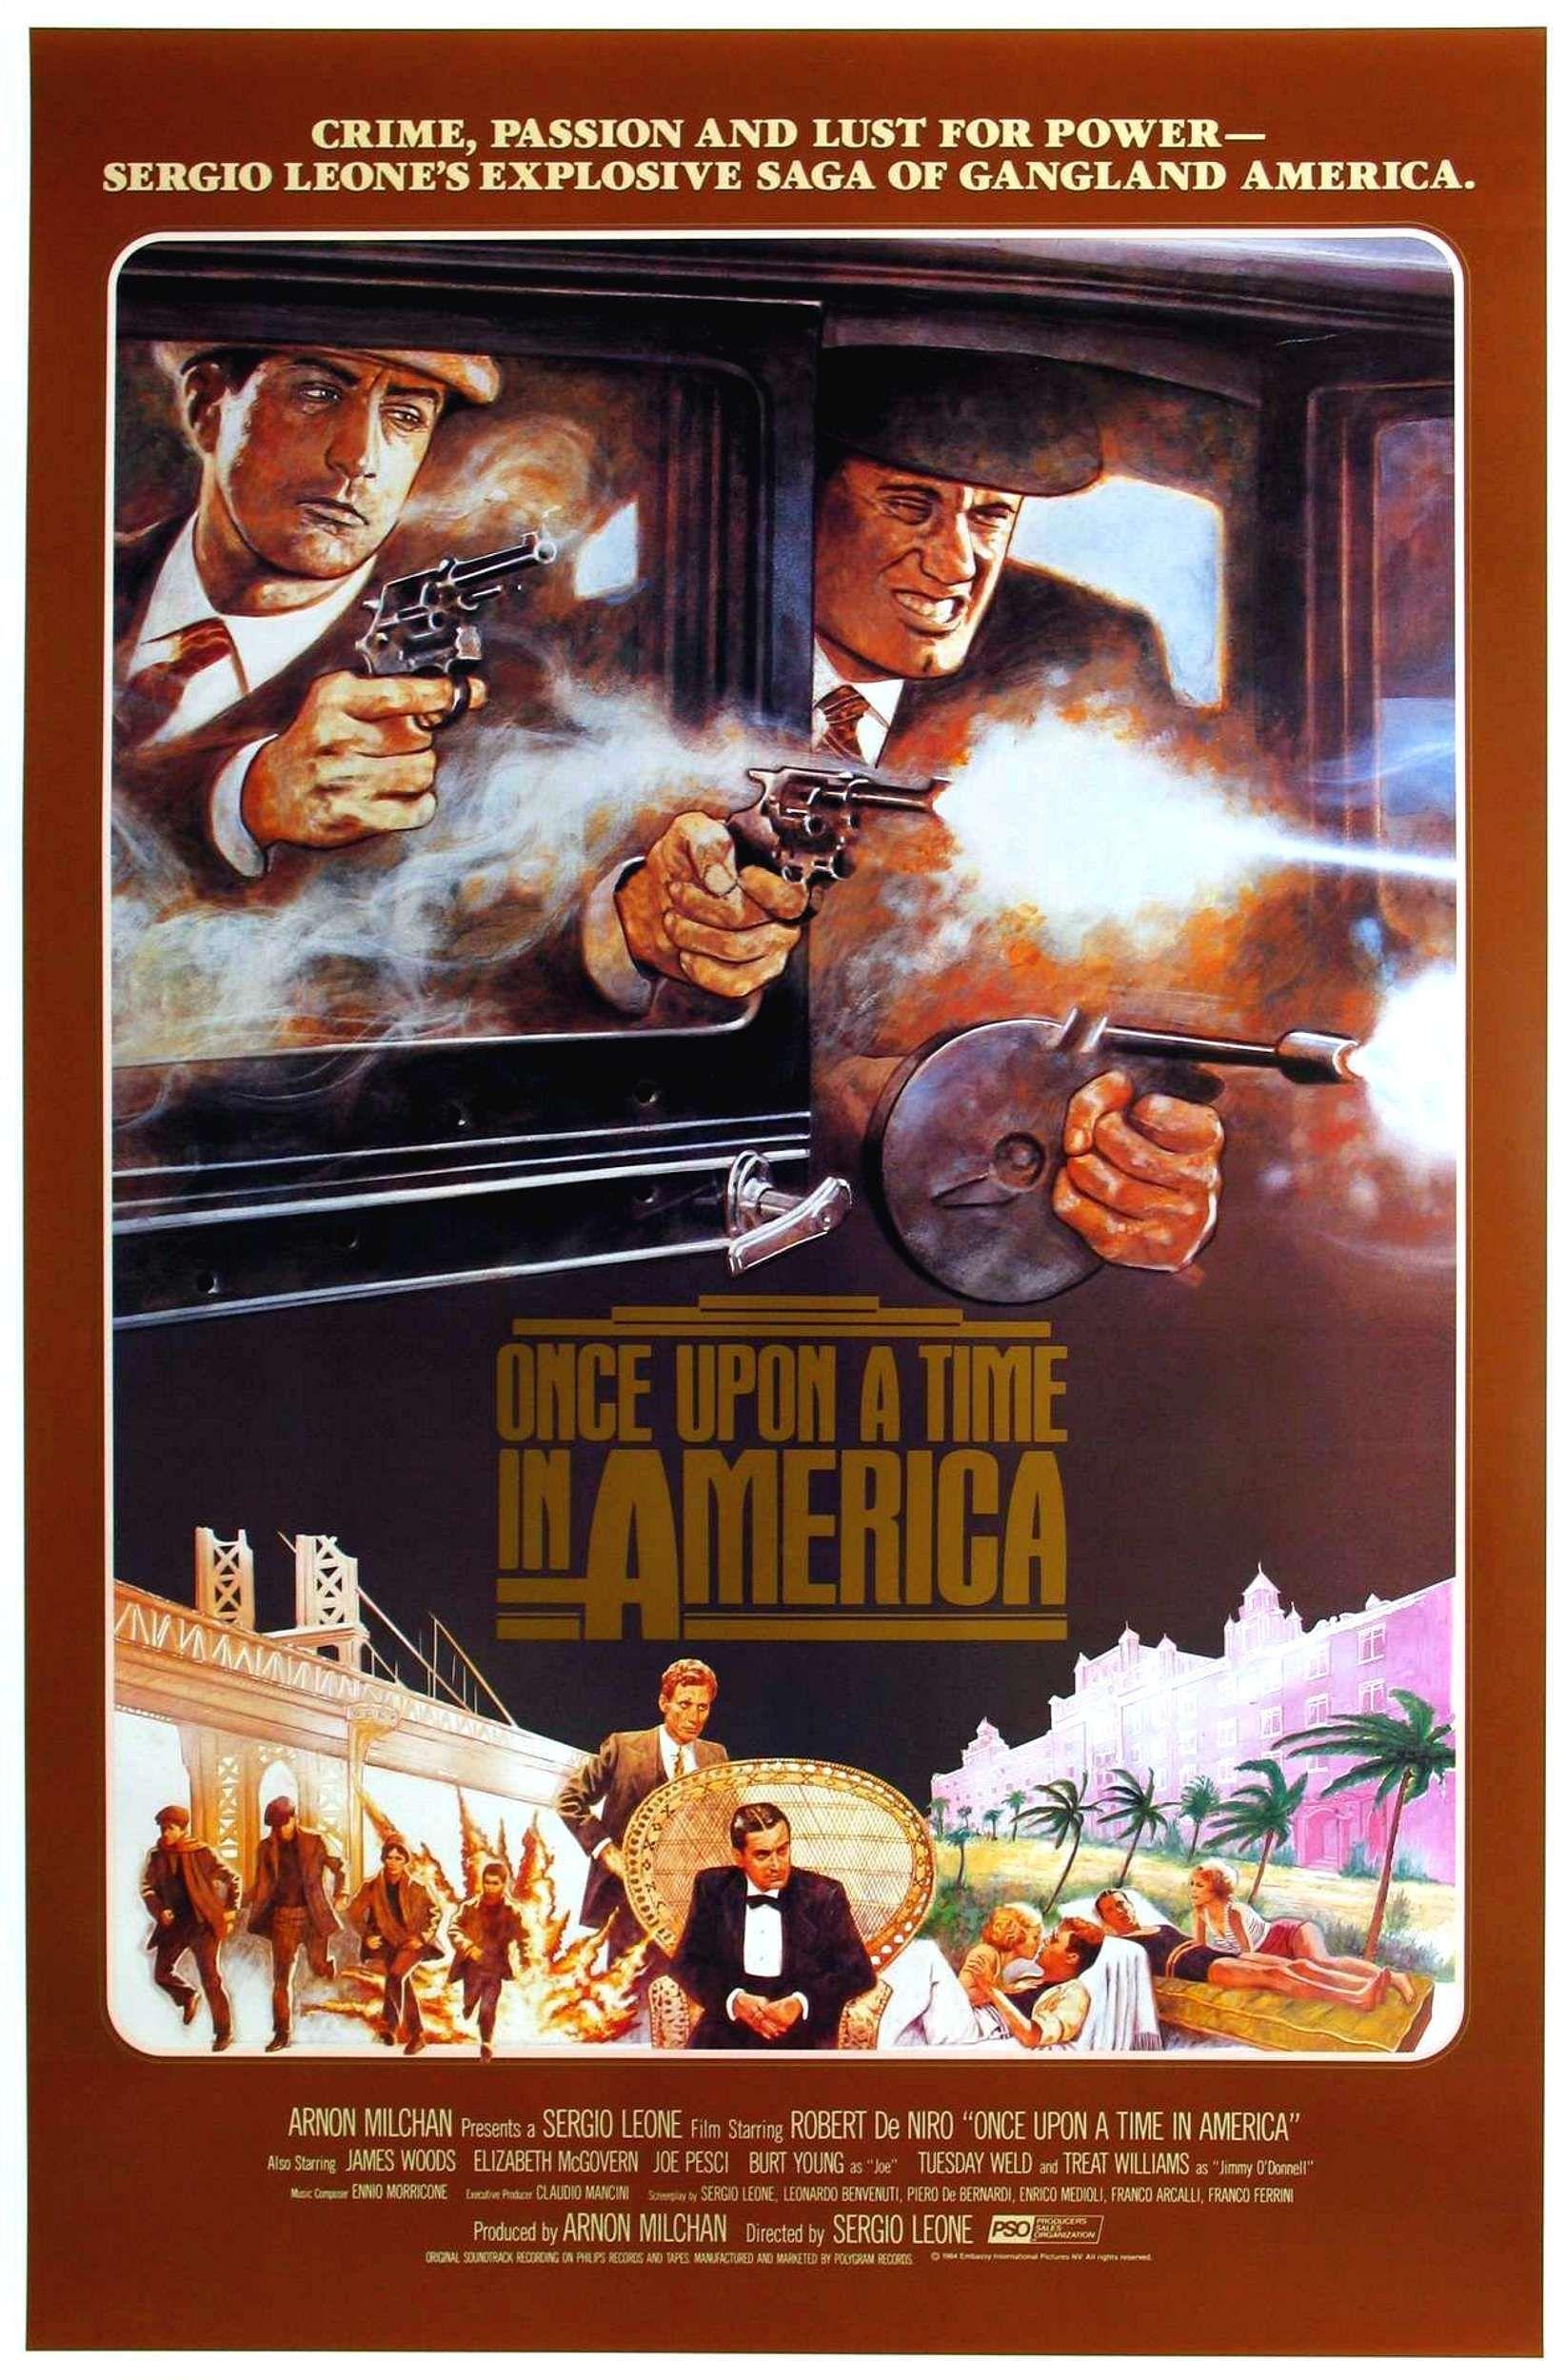 Once Upon a Time in America, 1984. Favoloso, con te immenso amore